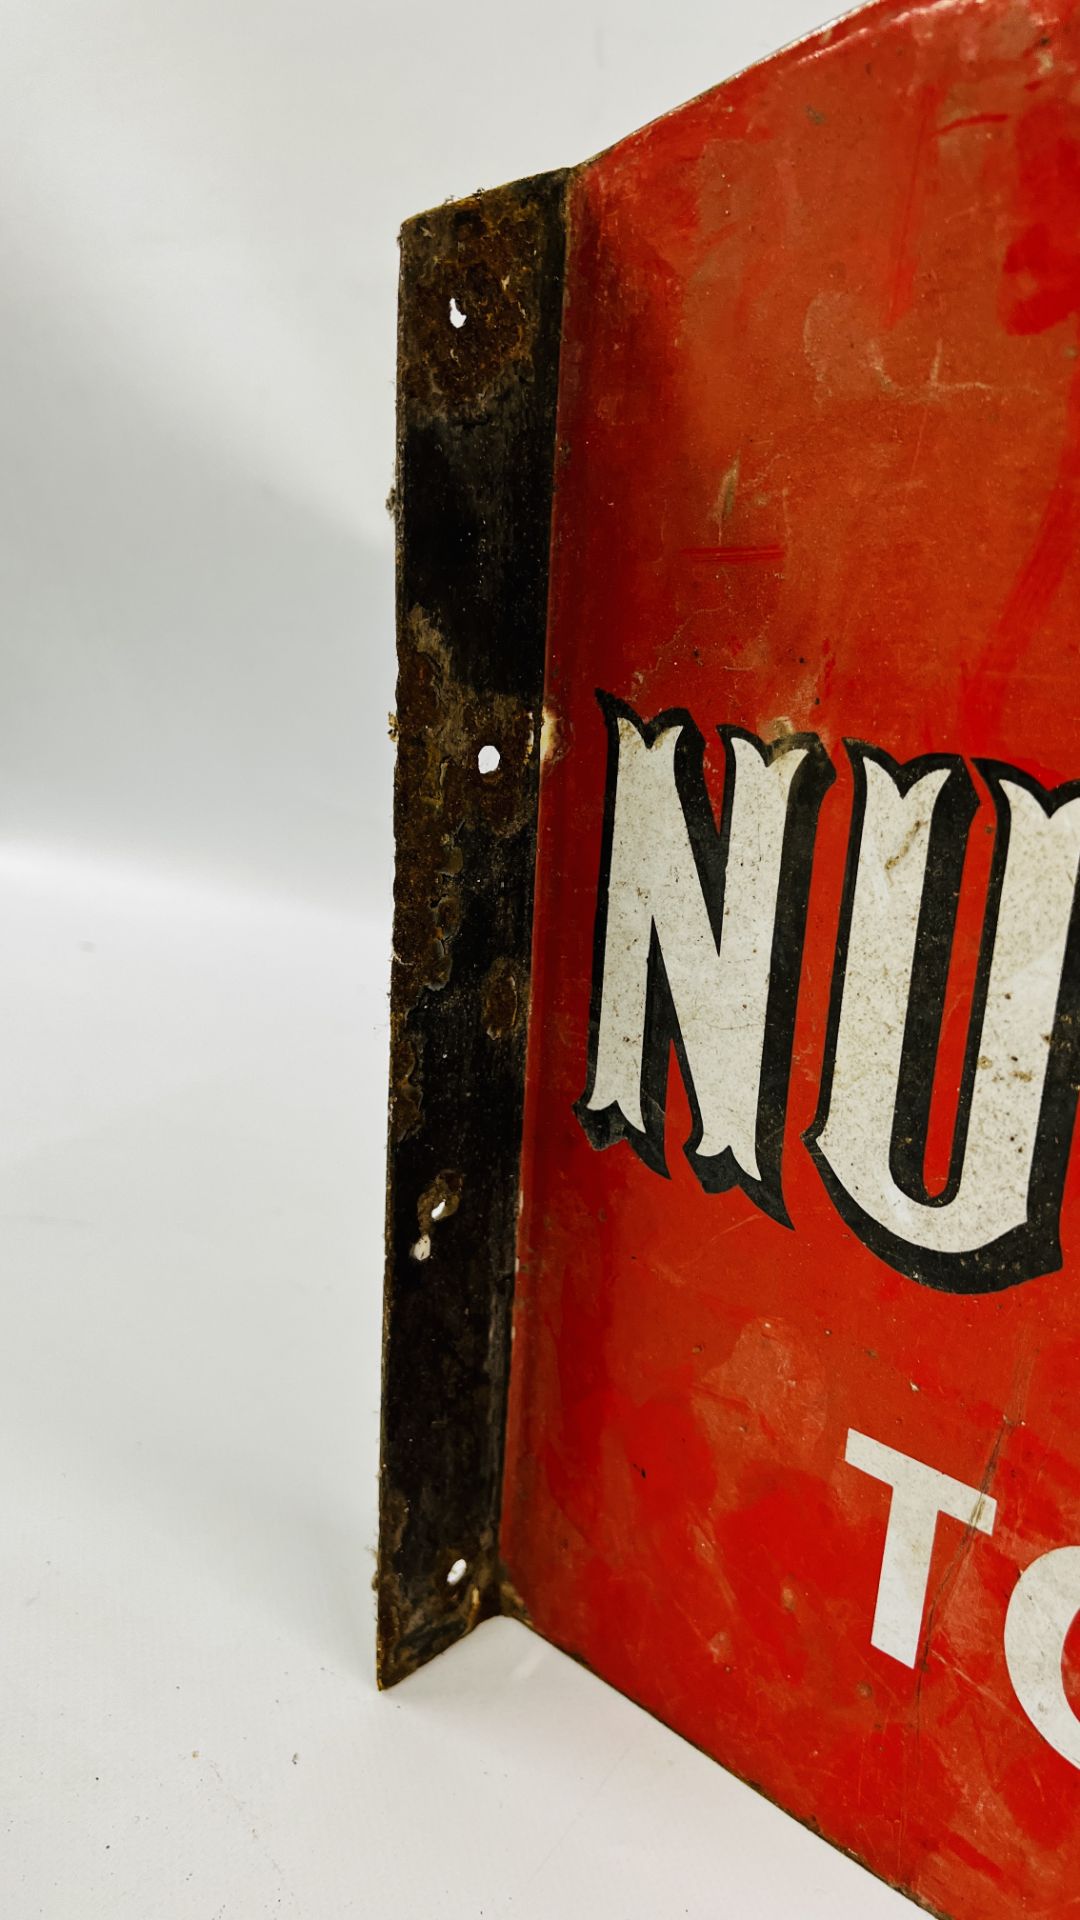 AN ORIGINAL VINTAGE DOUBLE SIDED ENAMEL SIGN "WE SELL NUT BROWN TOBACCO" - W 45 X H 34.5CM. - Image 6 of 14